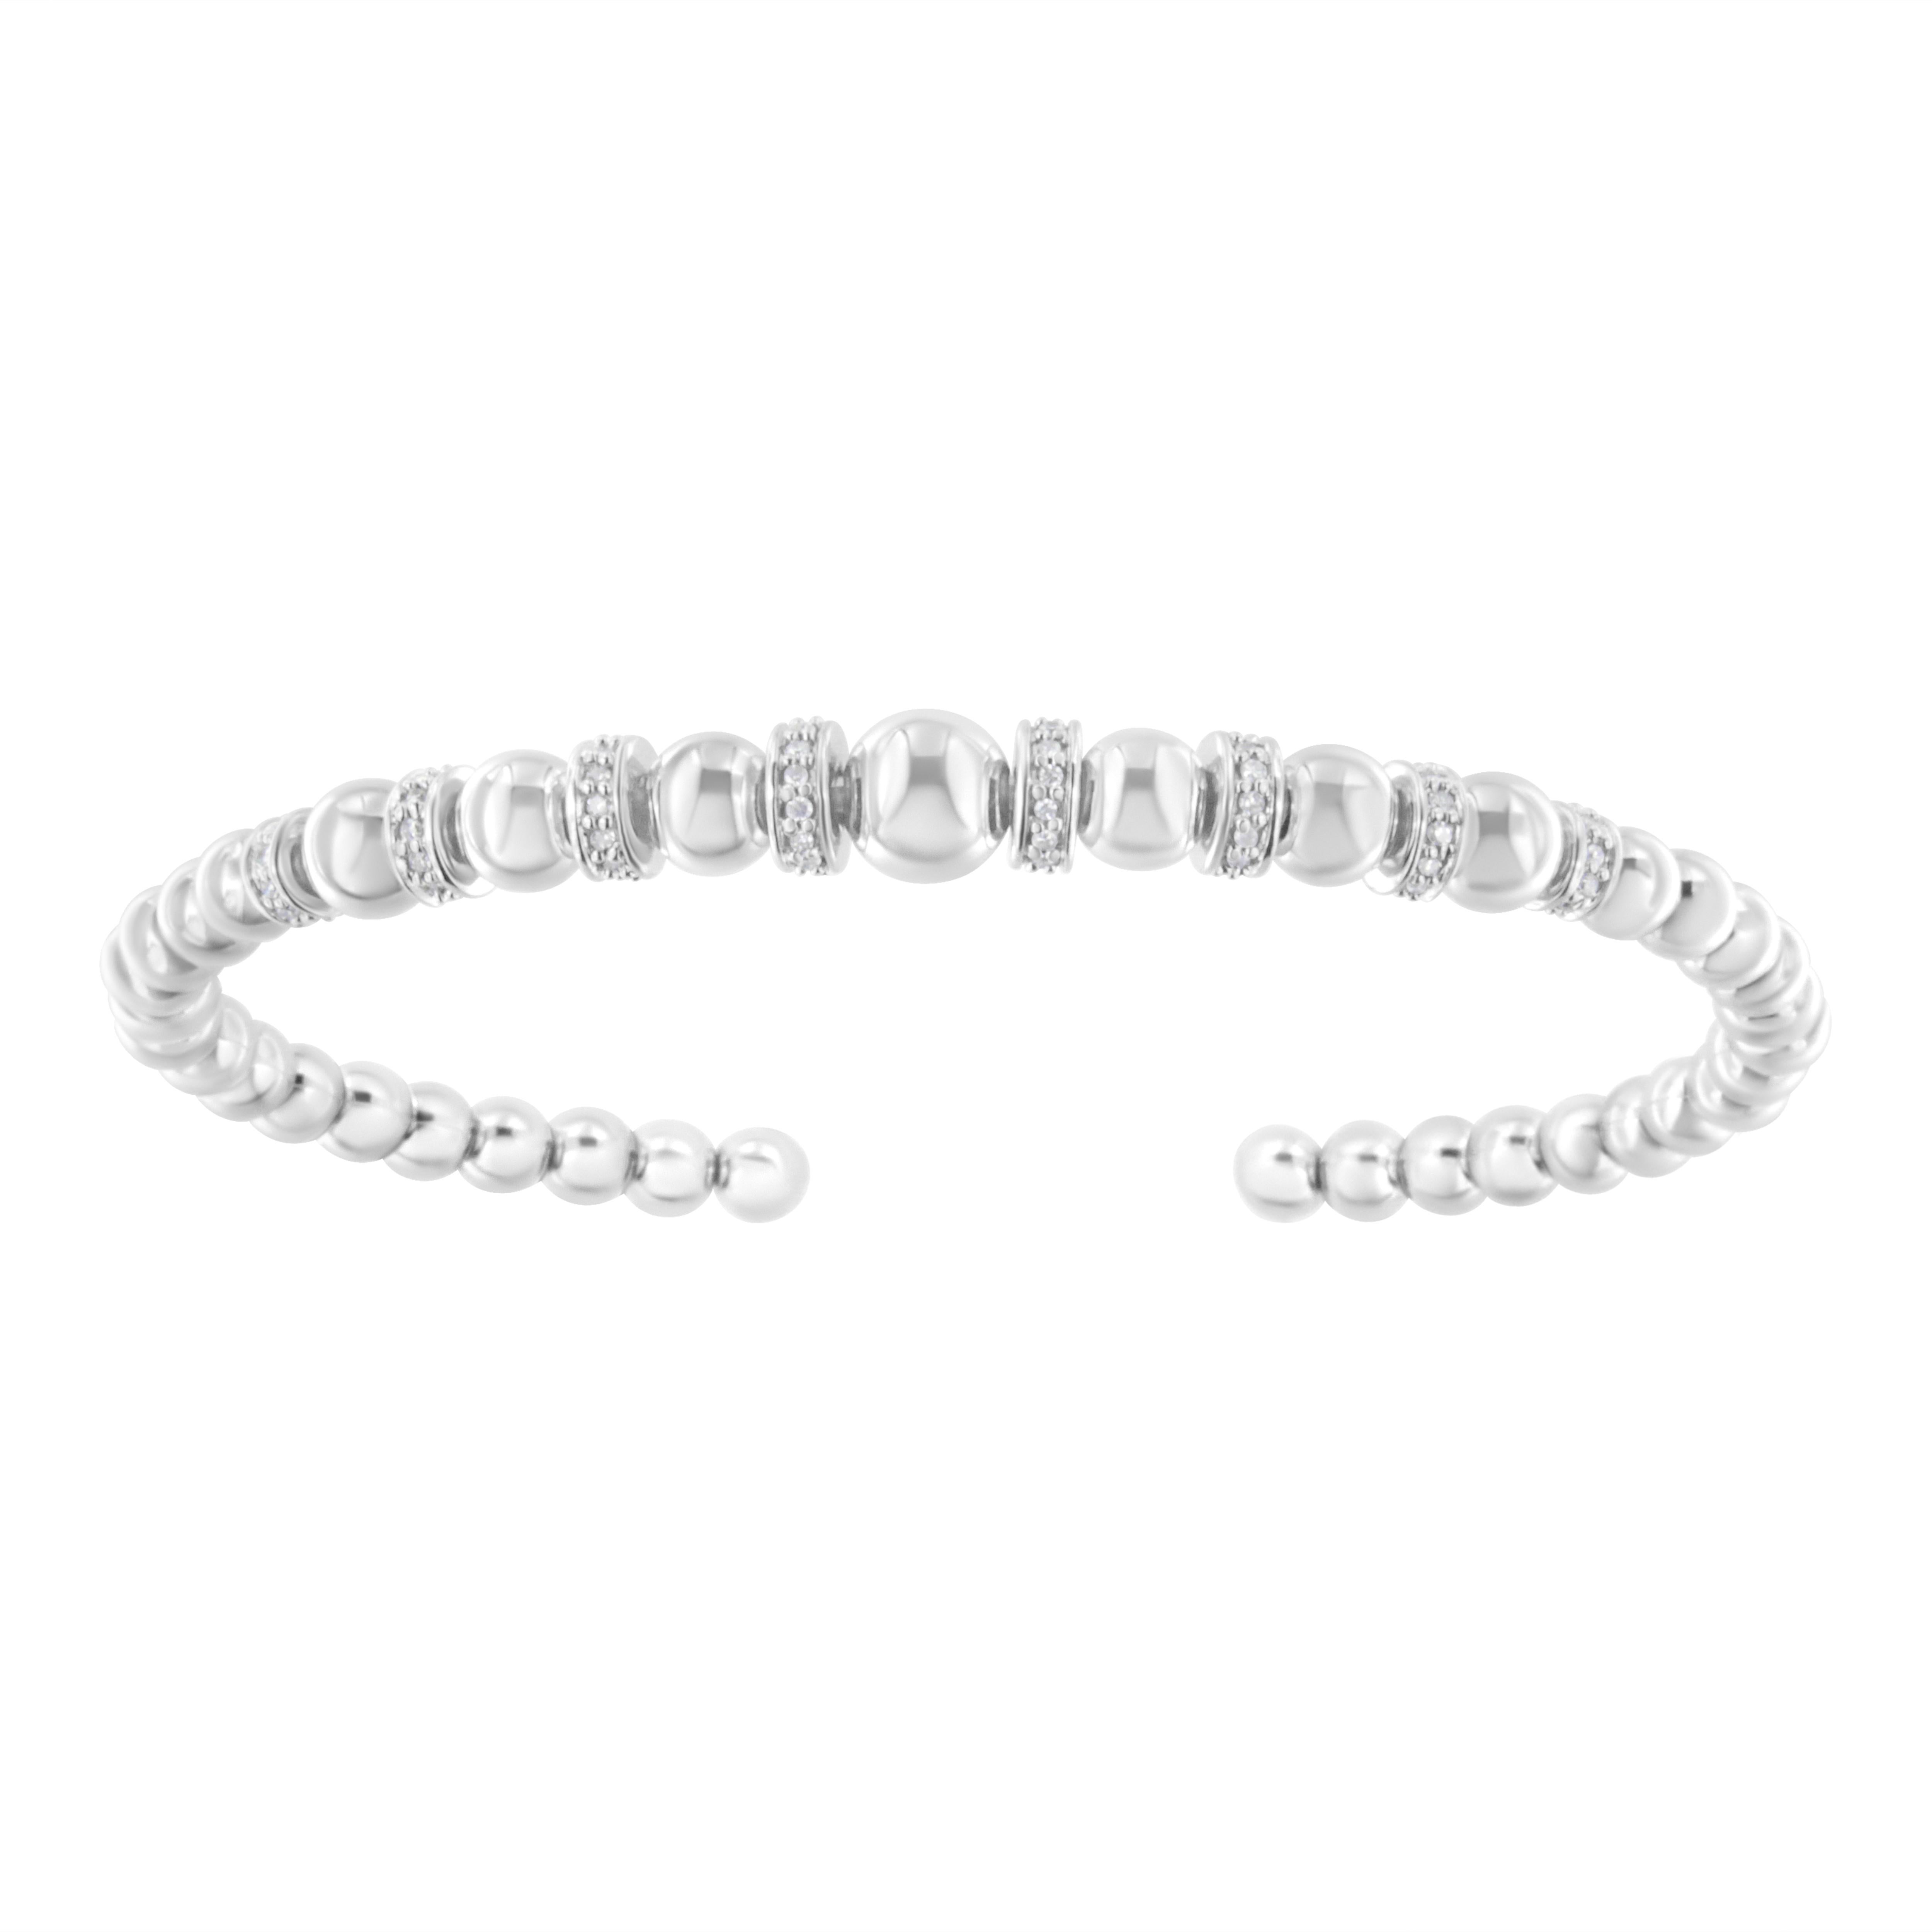 This gorgeous .925 sterling silver cuff bangle bracelet features 0.25 carat total weight of round, brilliant cut diamonds with 90 stones in all. The bangle features sterling silver rondelle beads that are largest in the center and become smaller